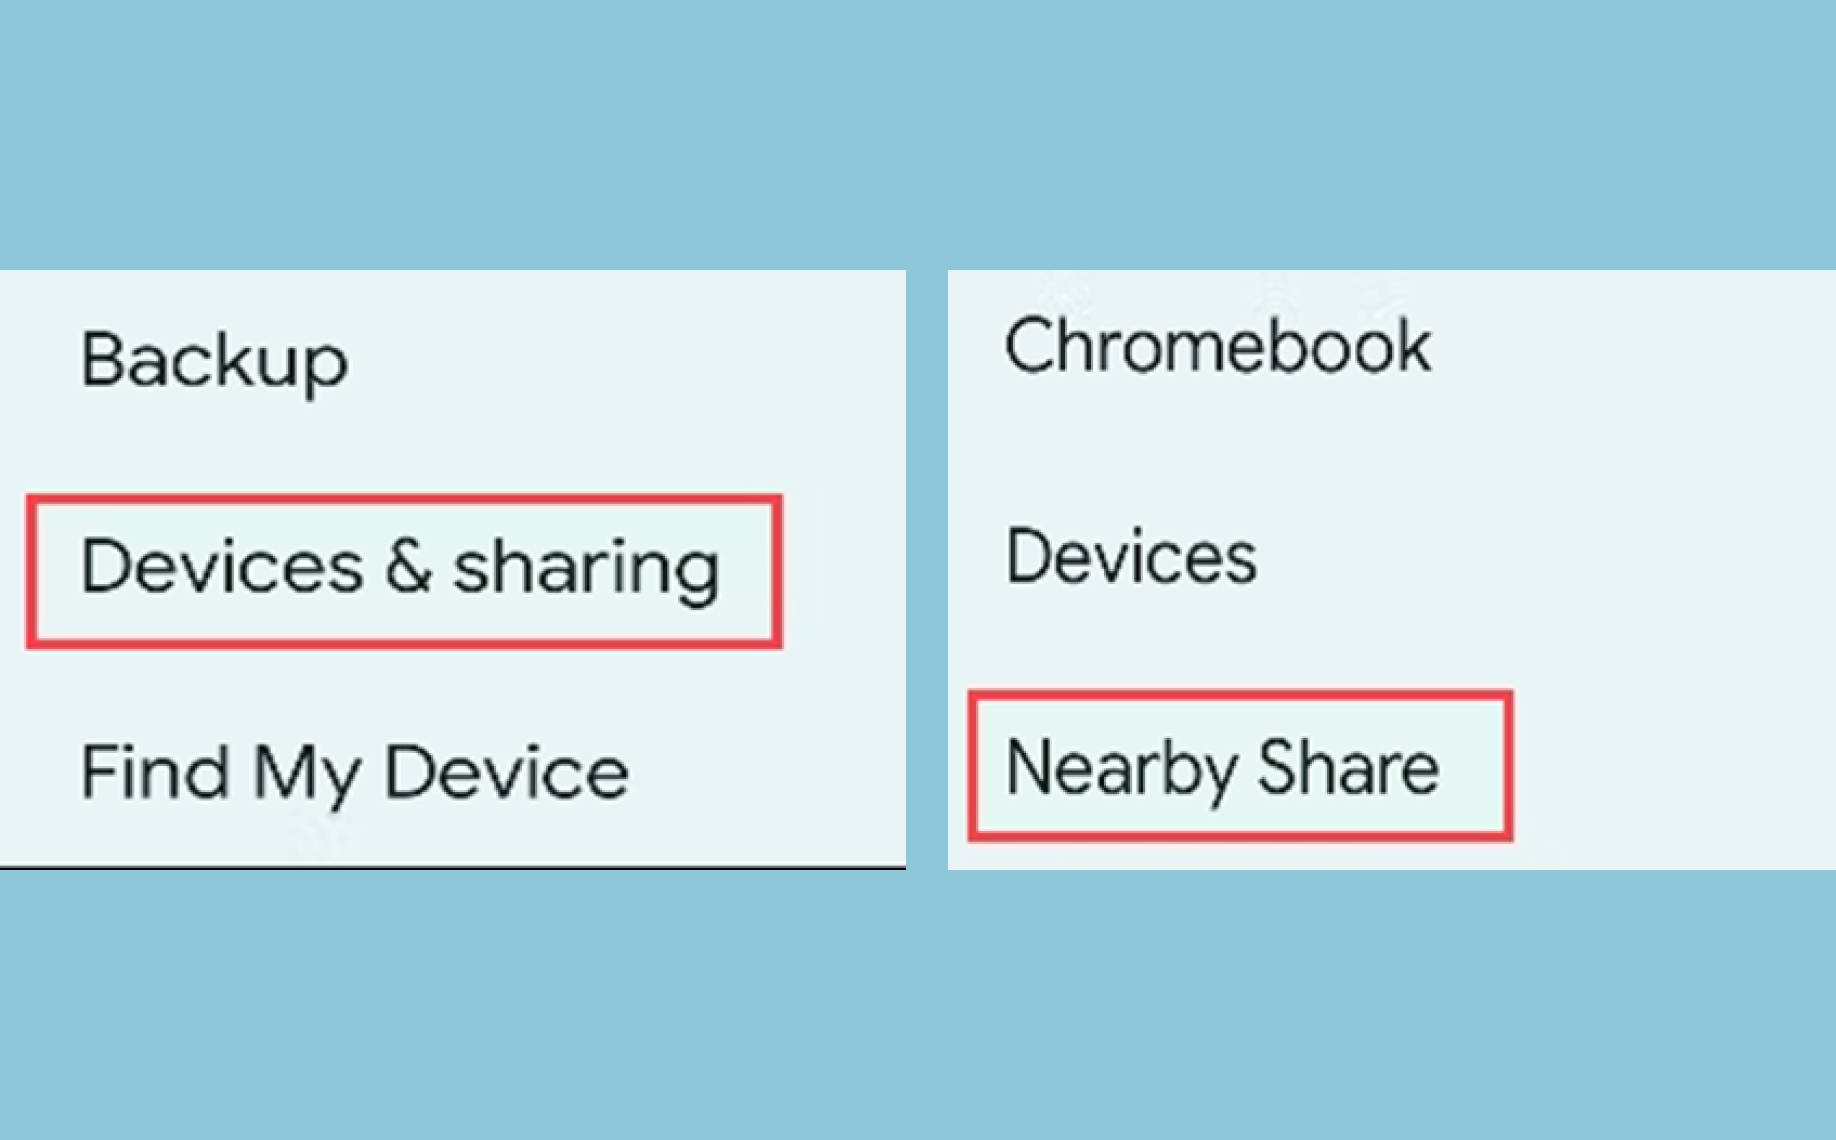 choose nearby share under devices & sharing